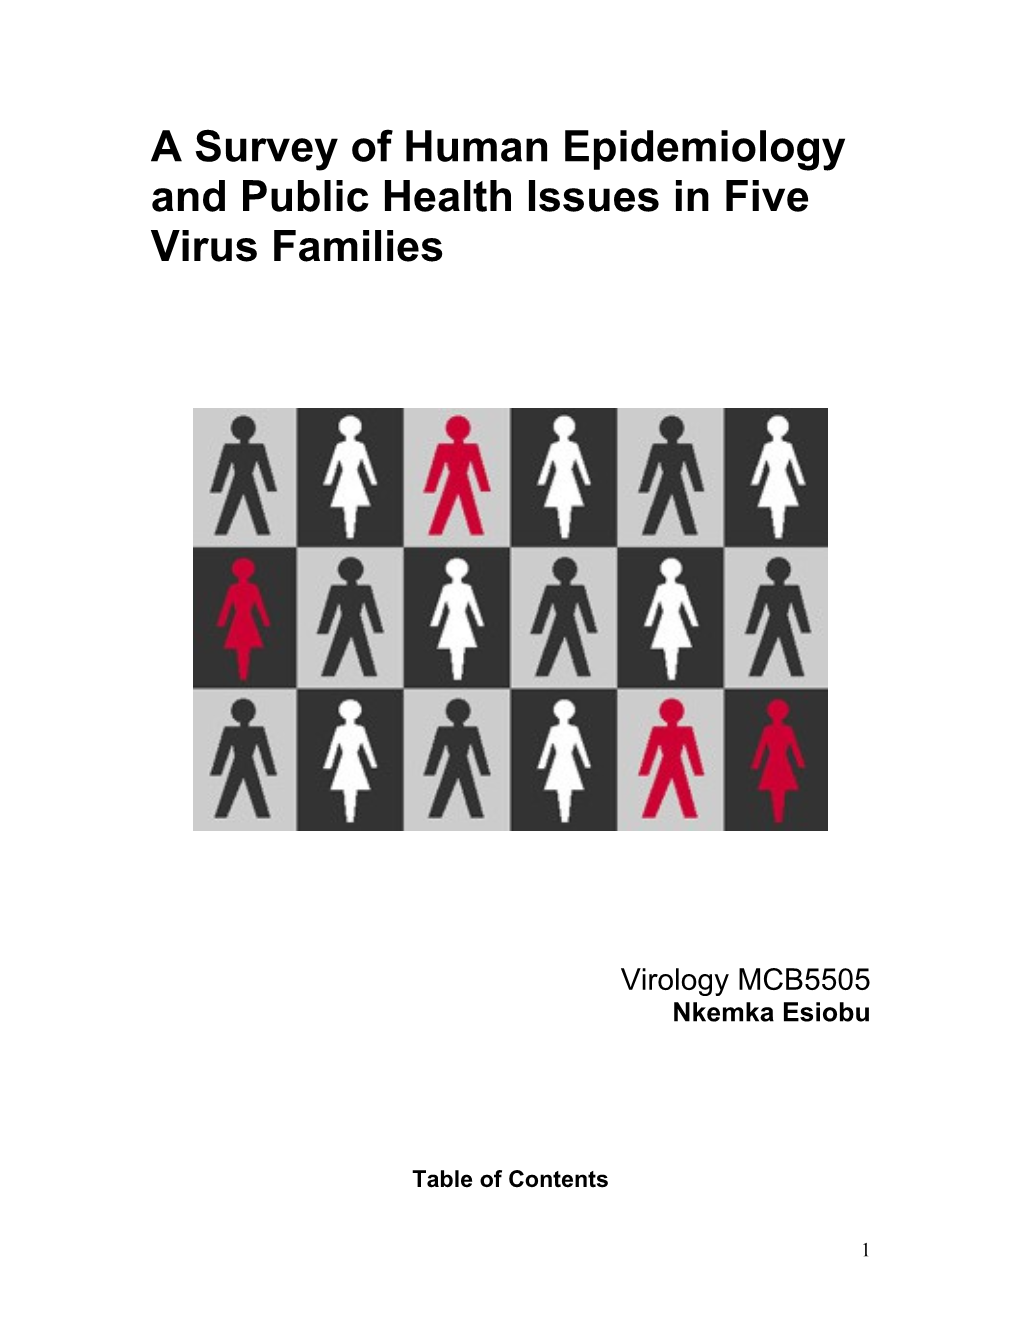 A Survey of Human Epidemiologyand Public Health Issues in Five Virus Families